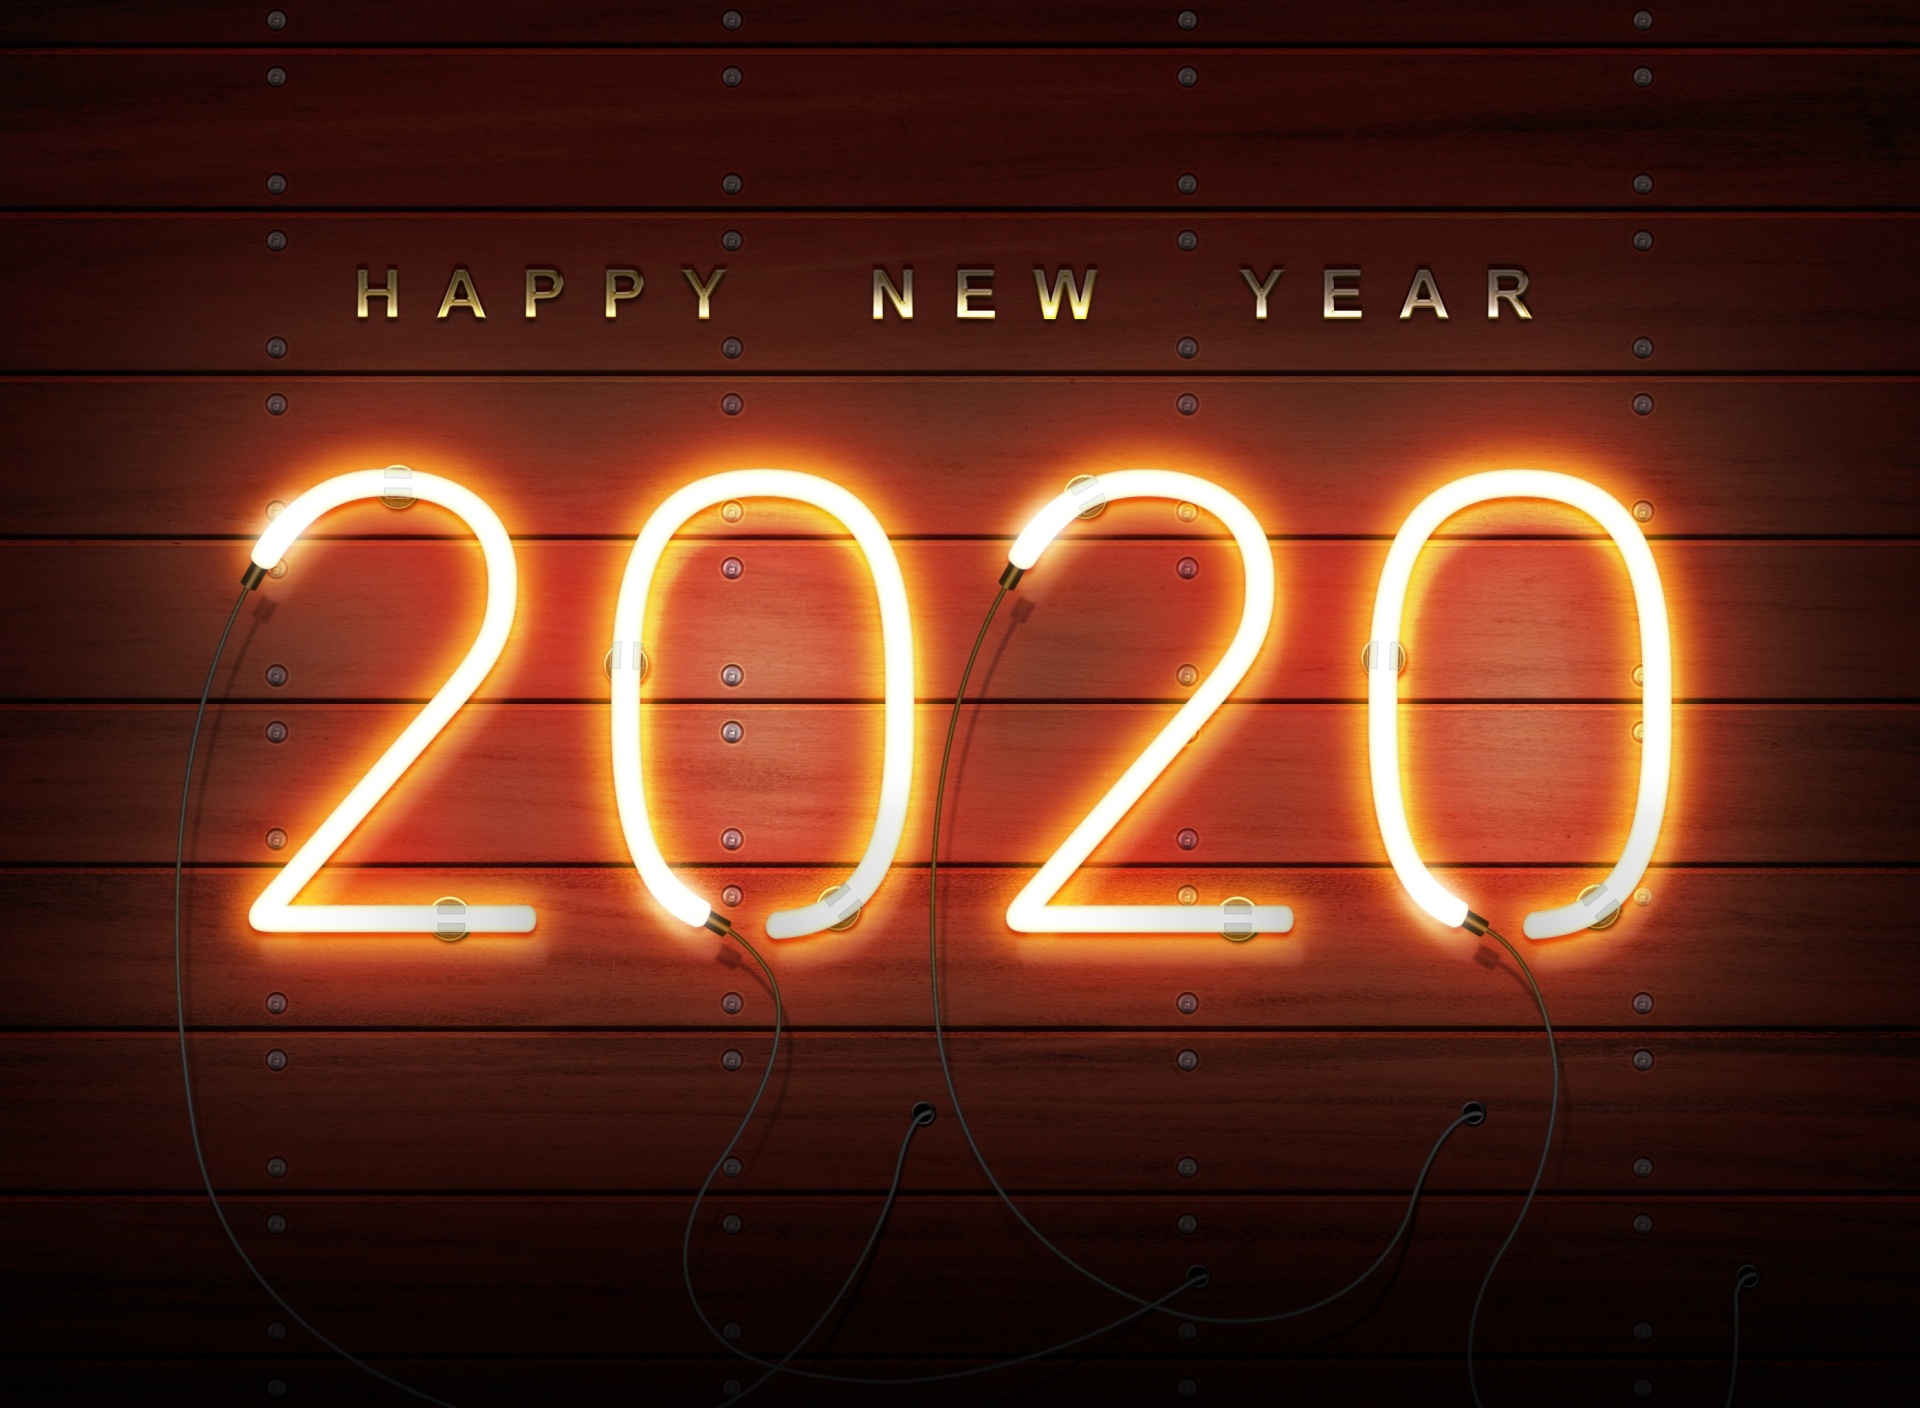 Happy New Year 2020 Wishes wallpaper 1920x1408